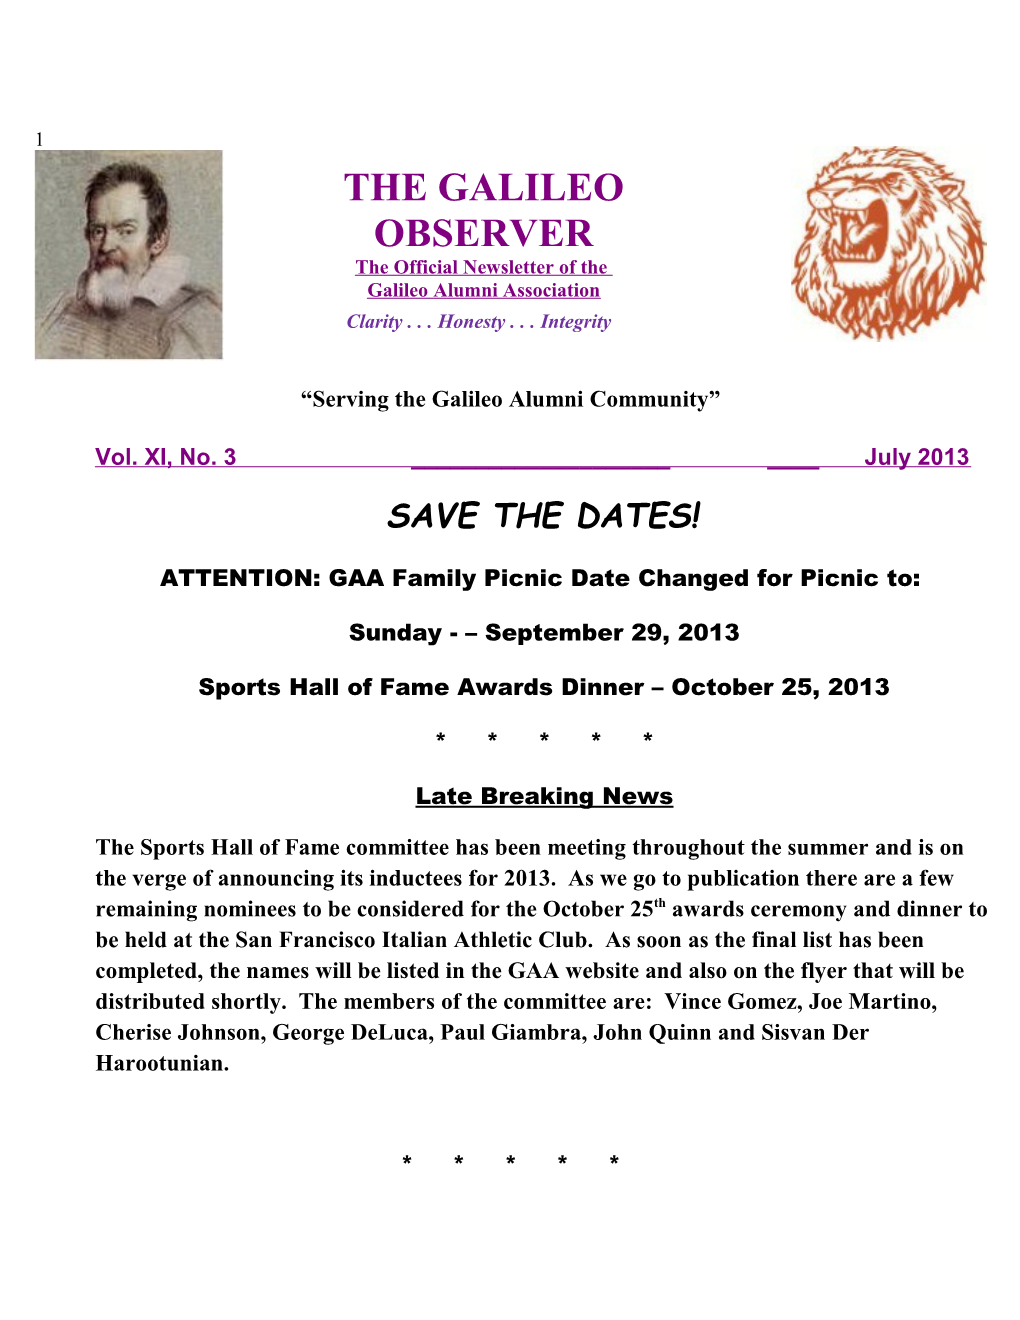 THE GALILEO OBSERVER a Monthly Newsletter of the Galileo Alumni Association